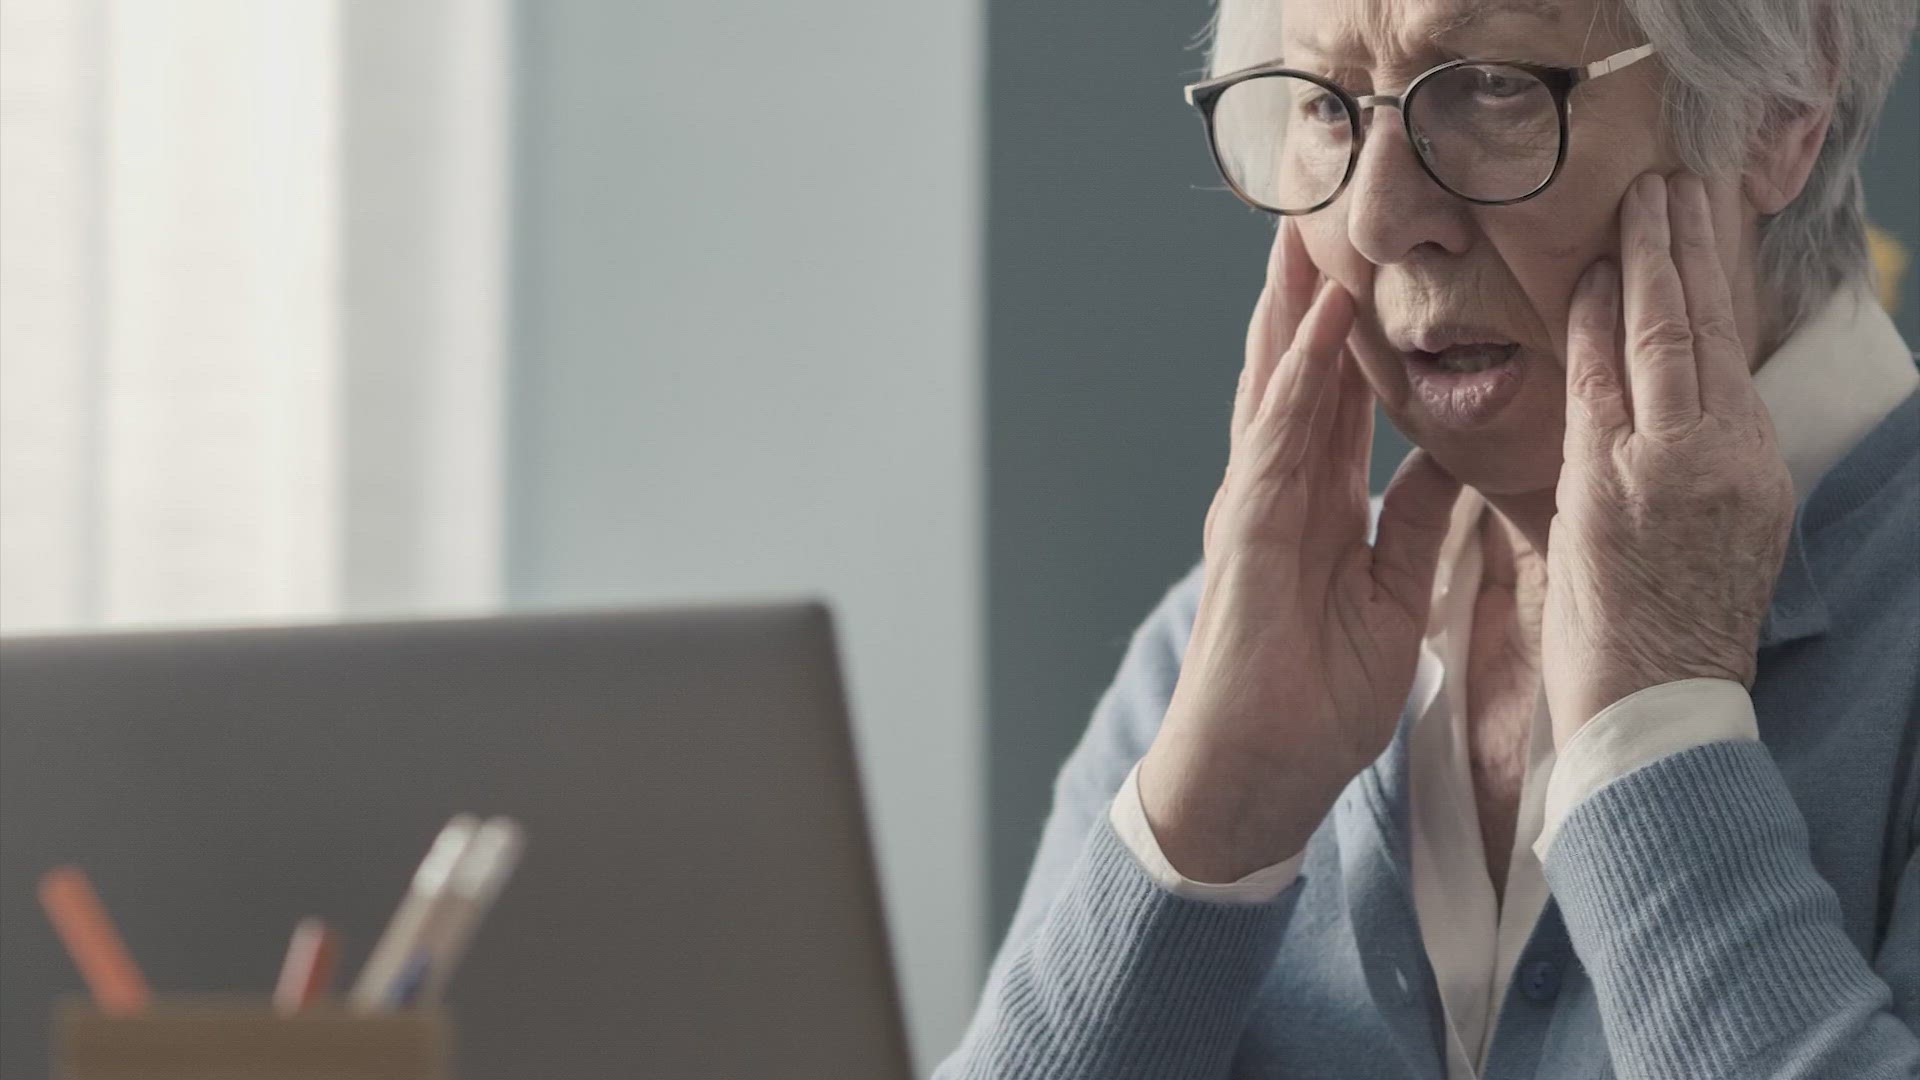 If you're over 60 or know someone who is, the FBI has a warning they want you to hear.